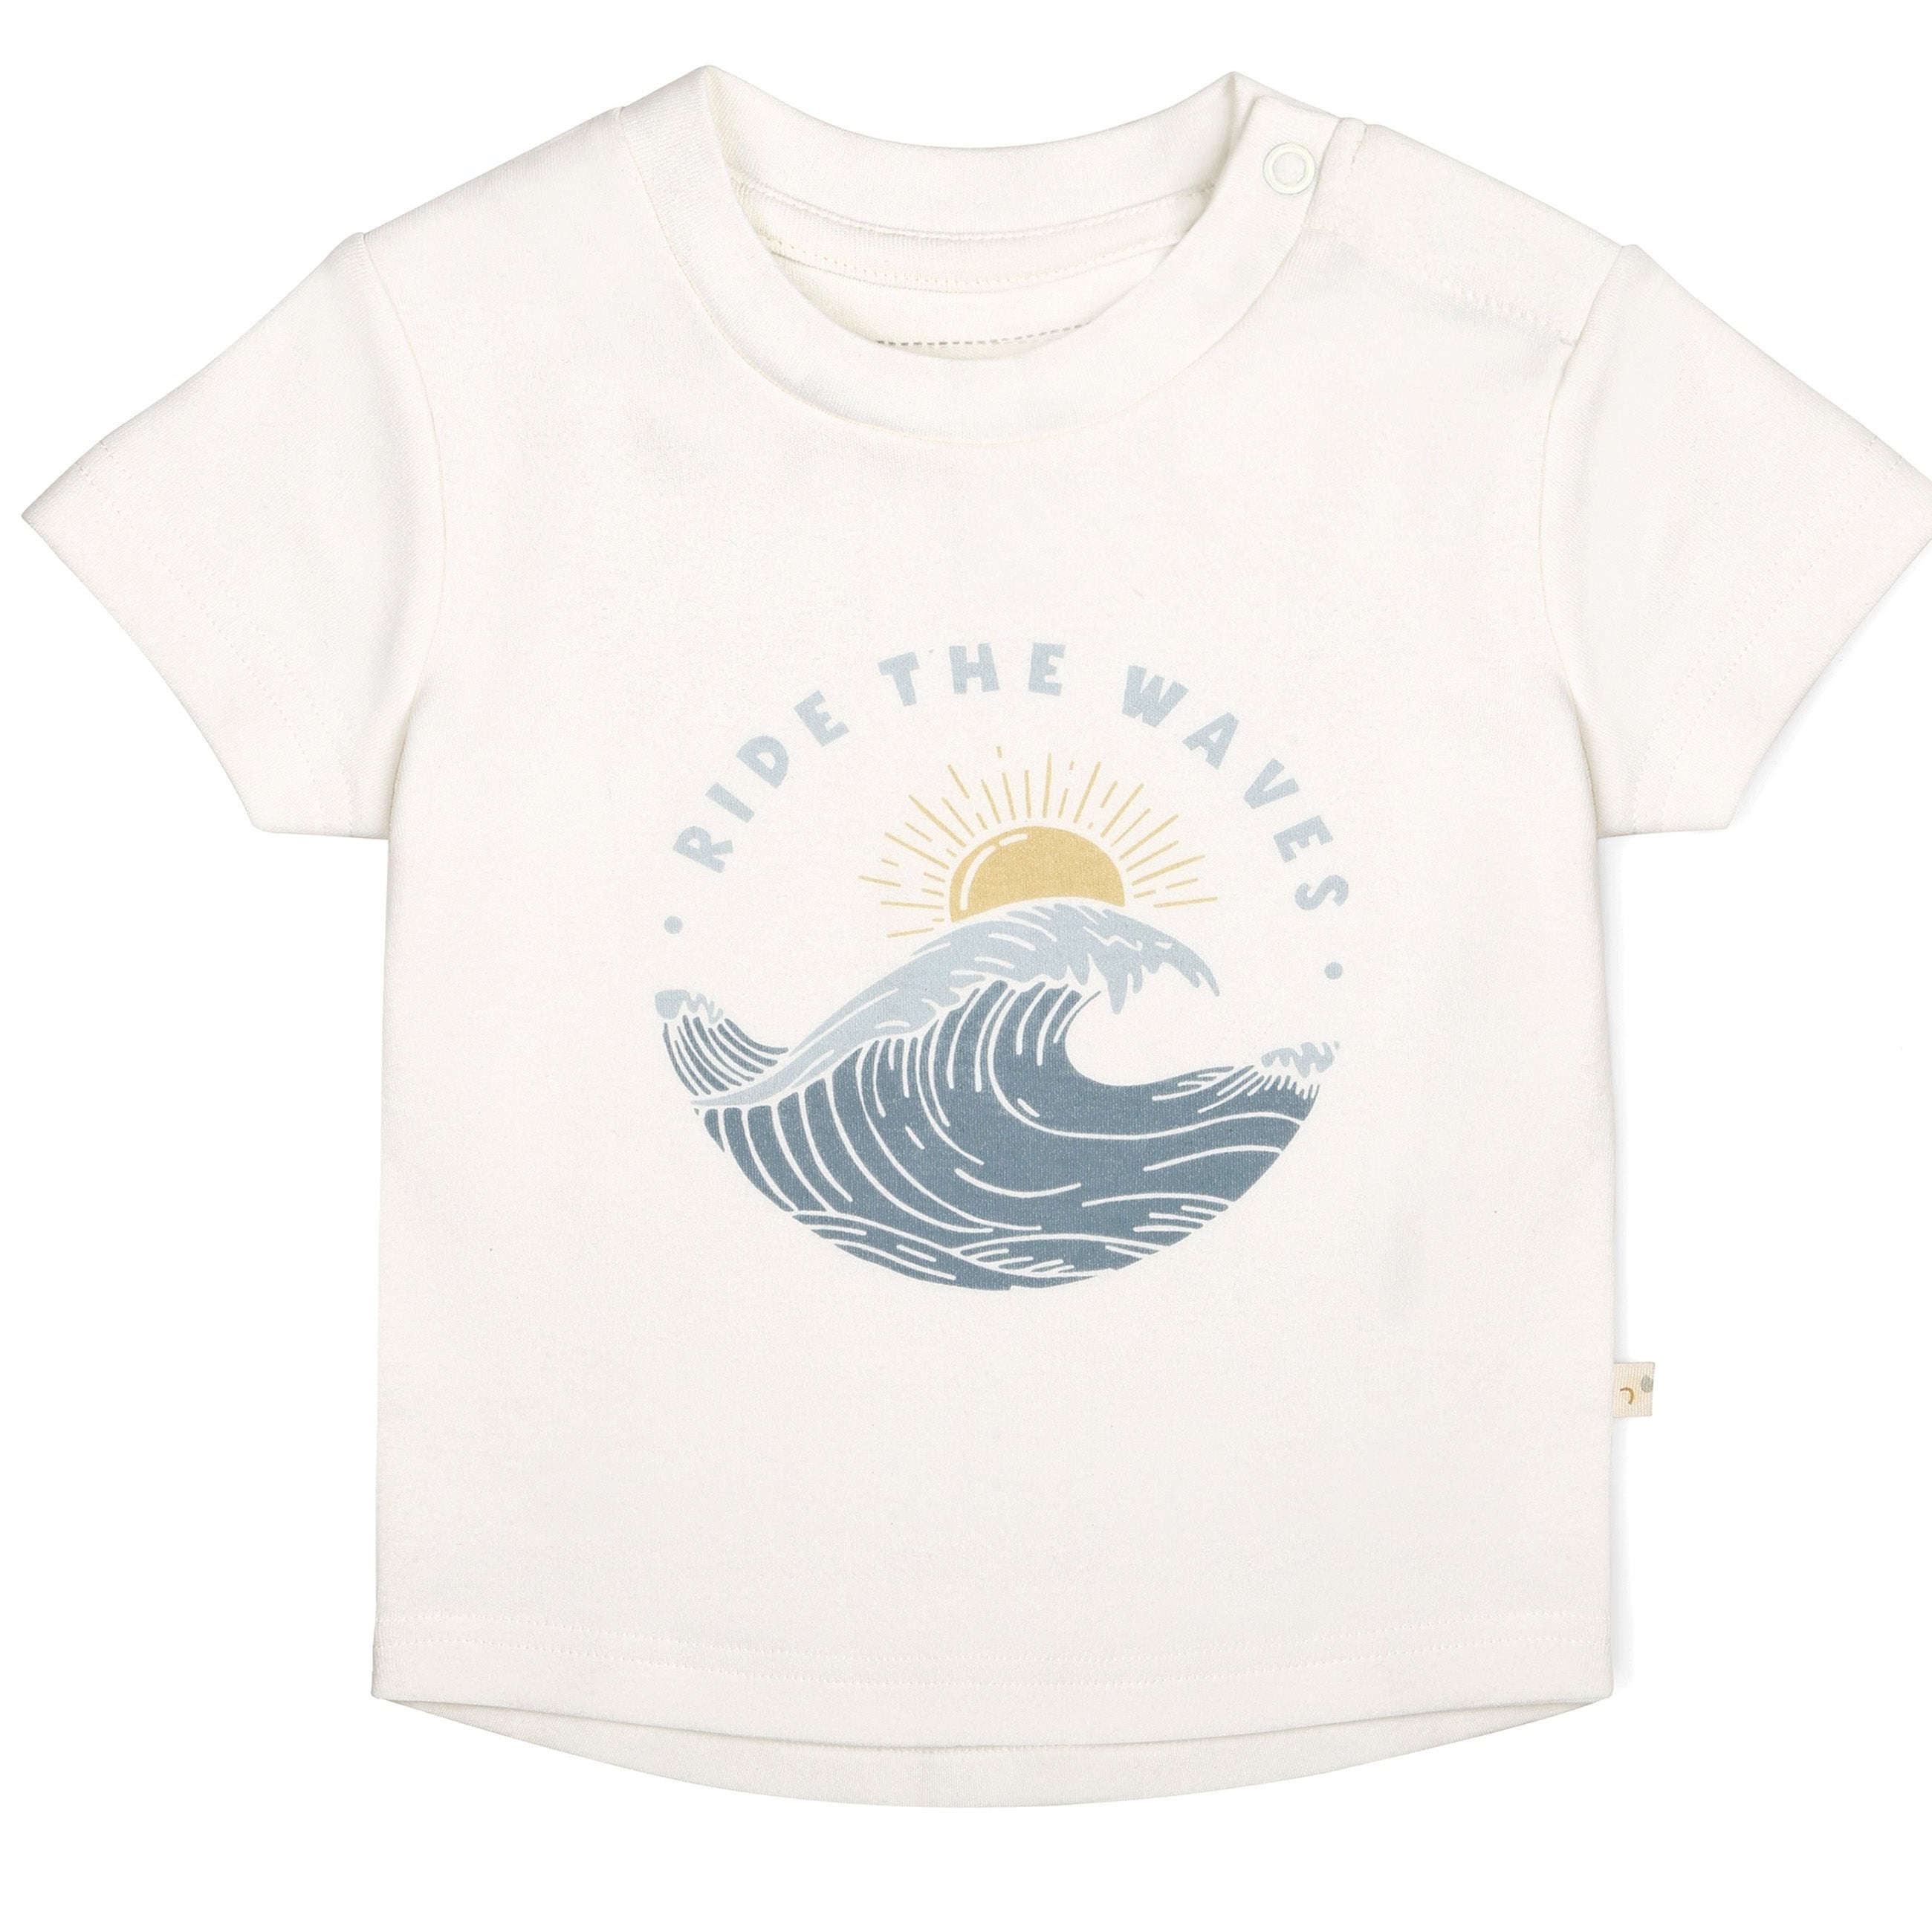 White Makemake Organics organic crew neck toddler tee with a graphic of a wave encircling a sun and the phrase "ride the waves" printed in blue.